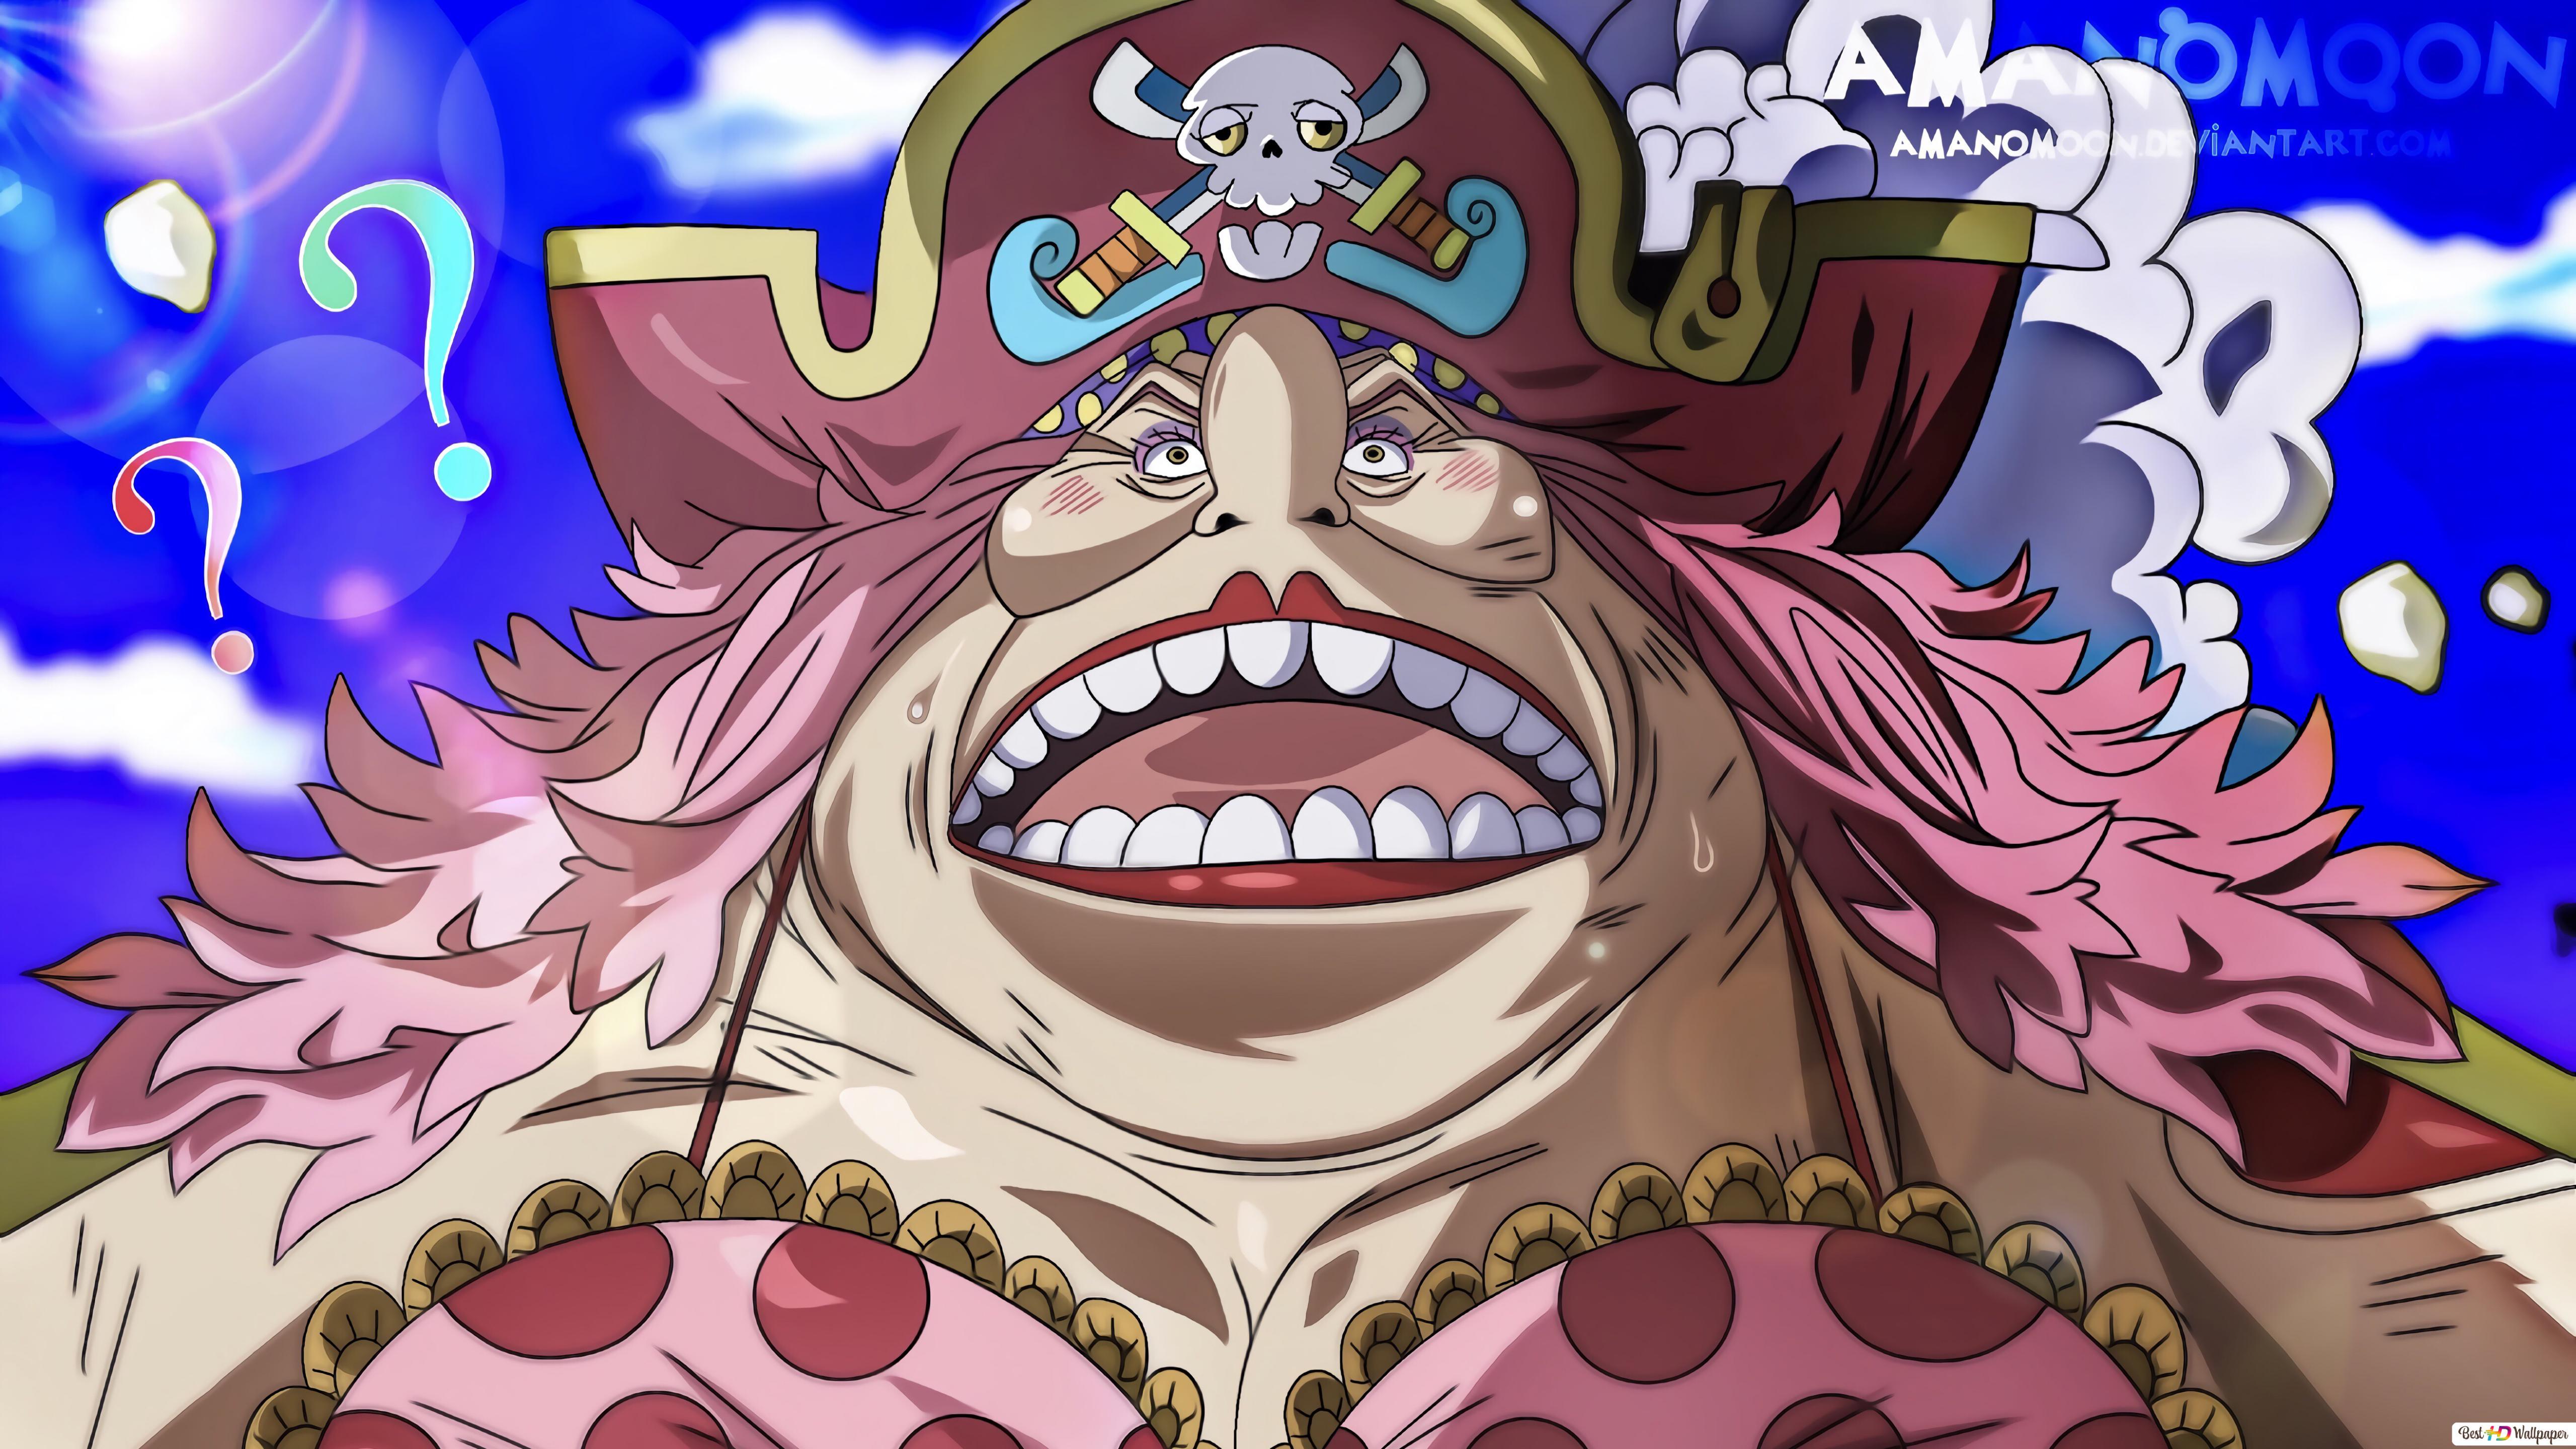 Charlotte Linlin Wallpaper For Pc, One Piece, Anime